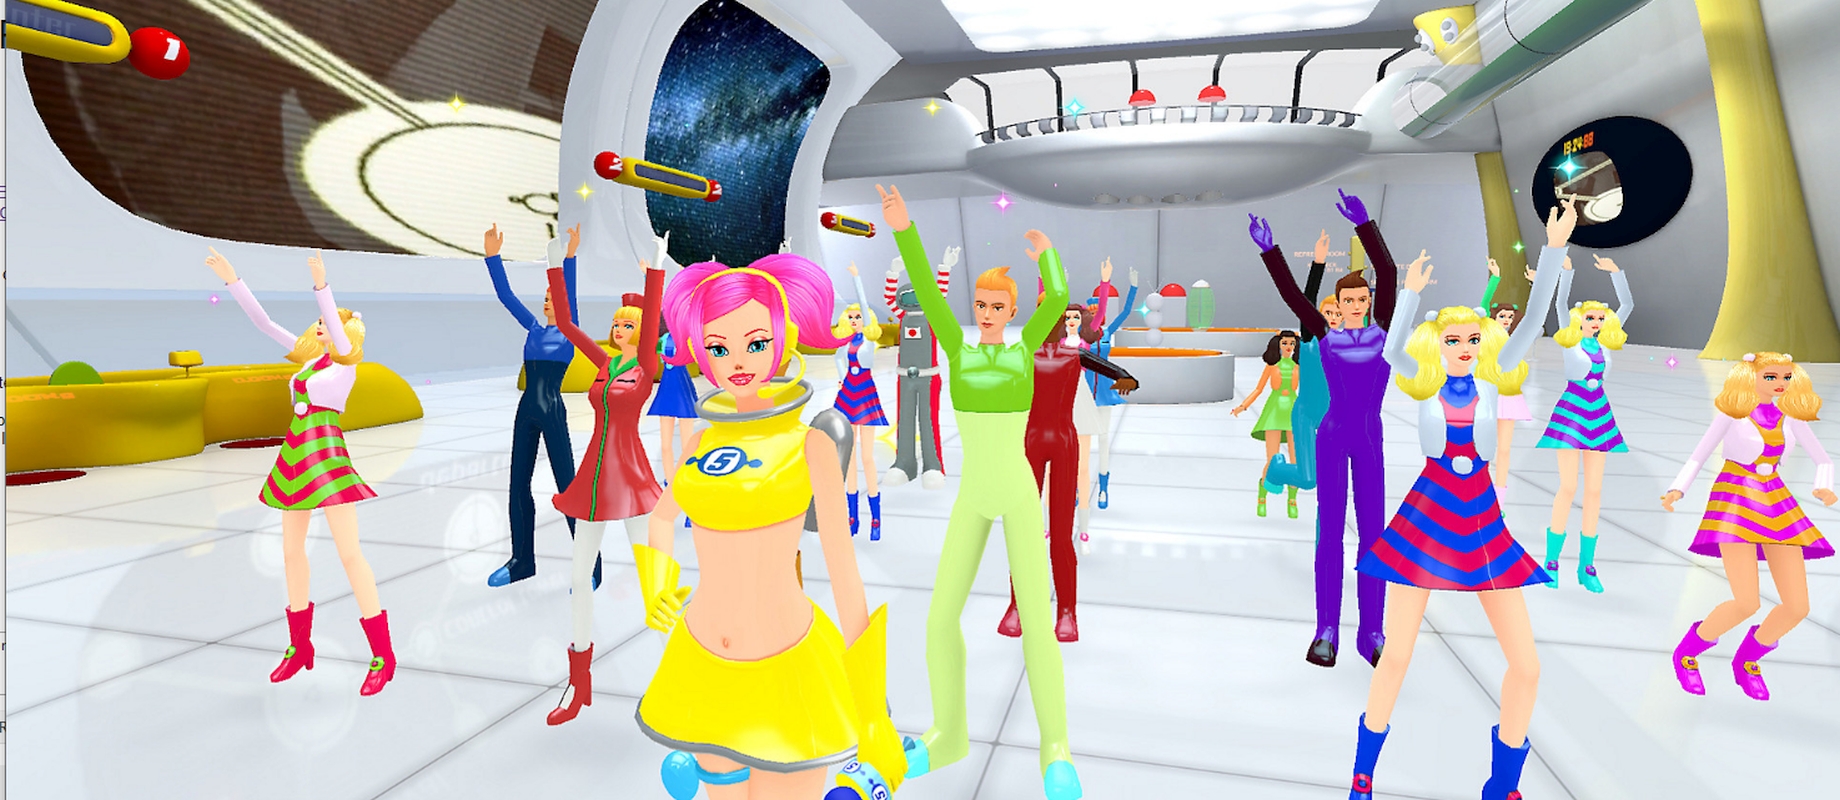 Space Channel 5 VR Kinda Funky News Flash Release Date Announced For PlayStation 4 After Delays